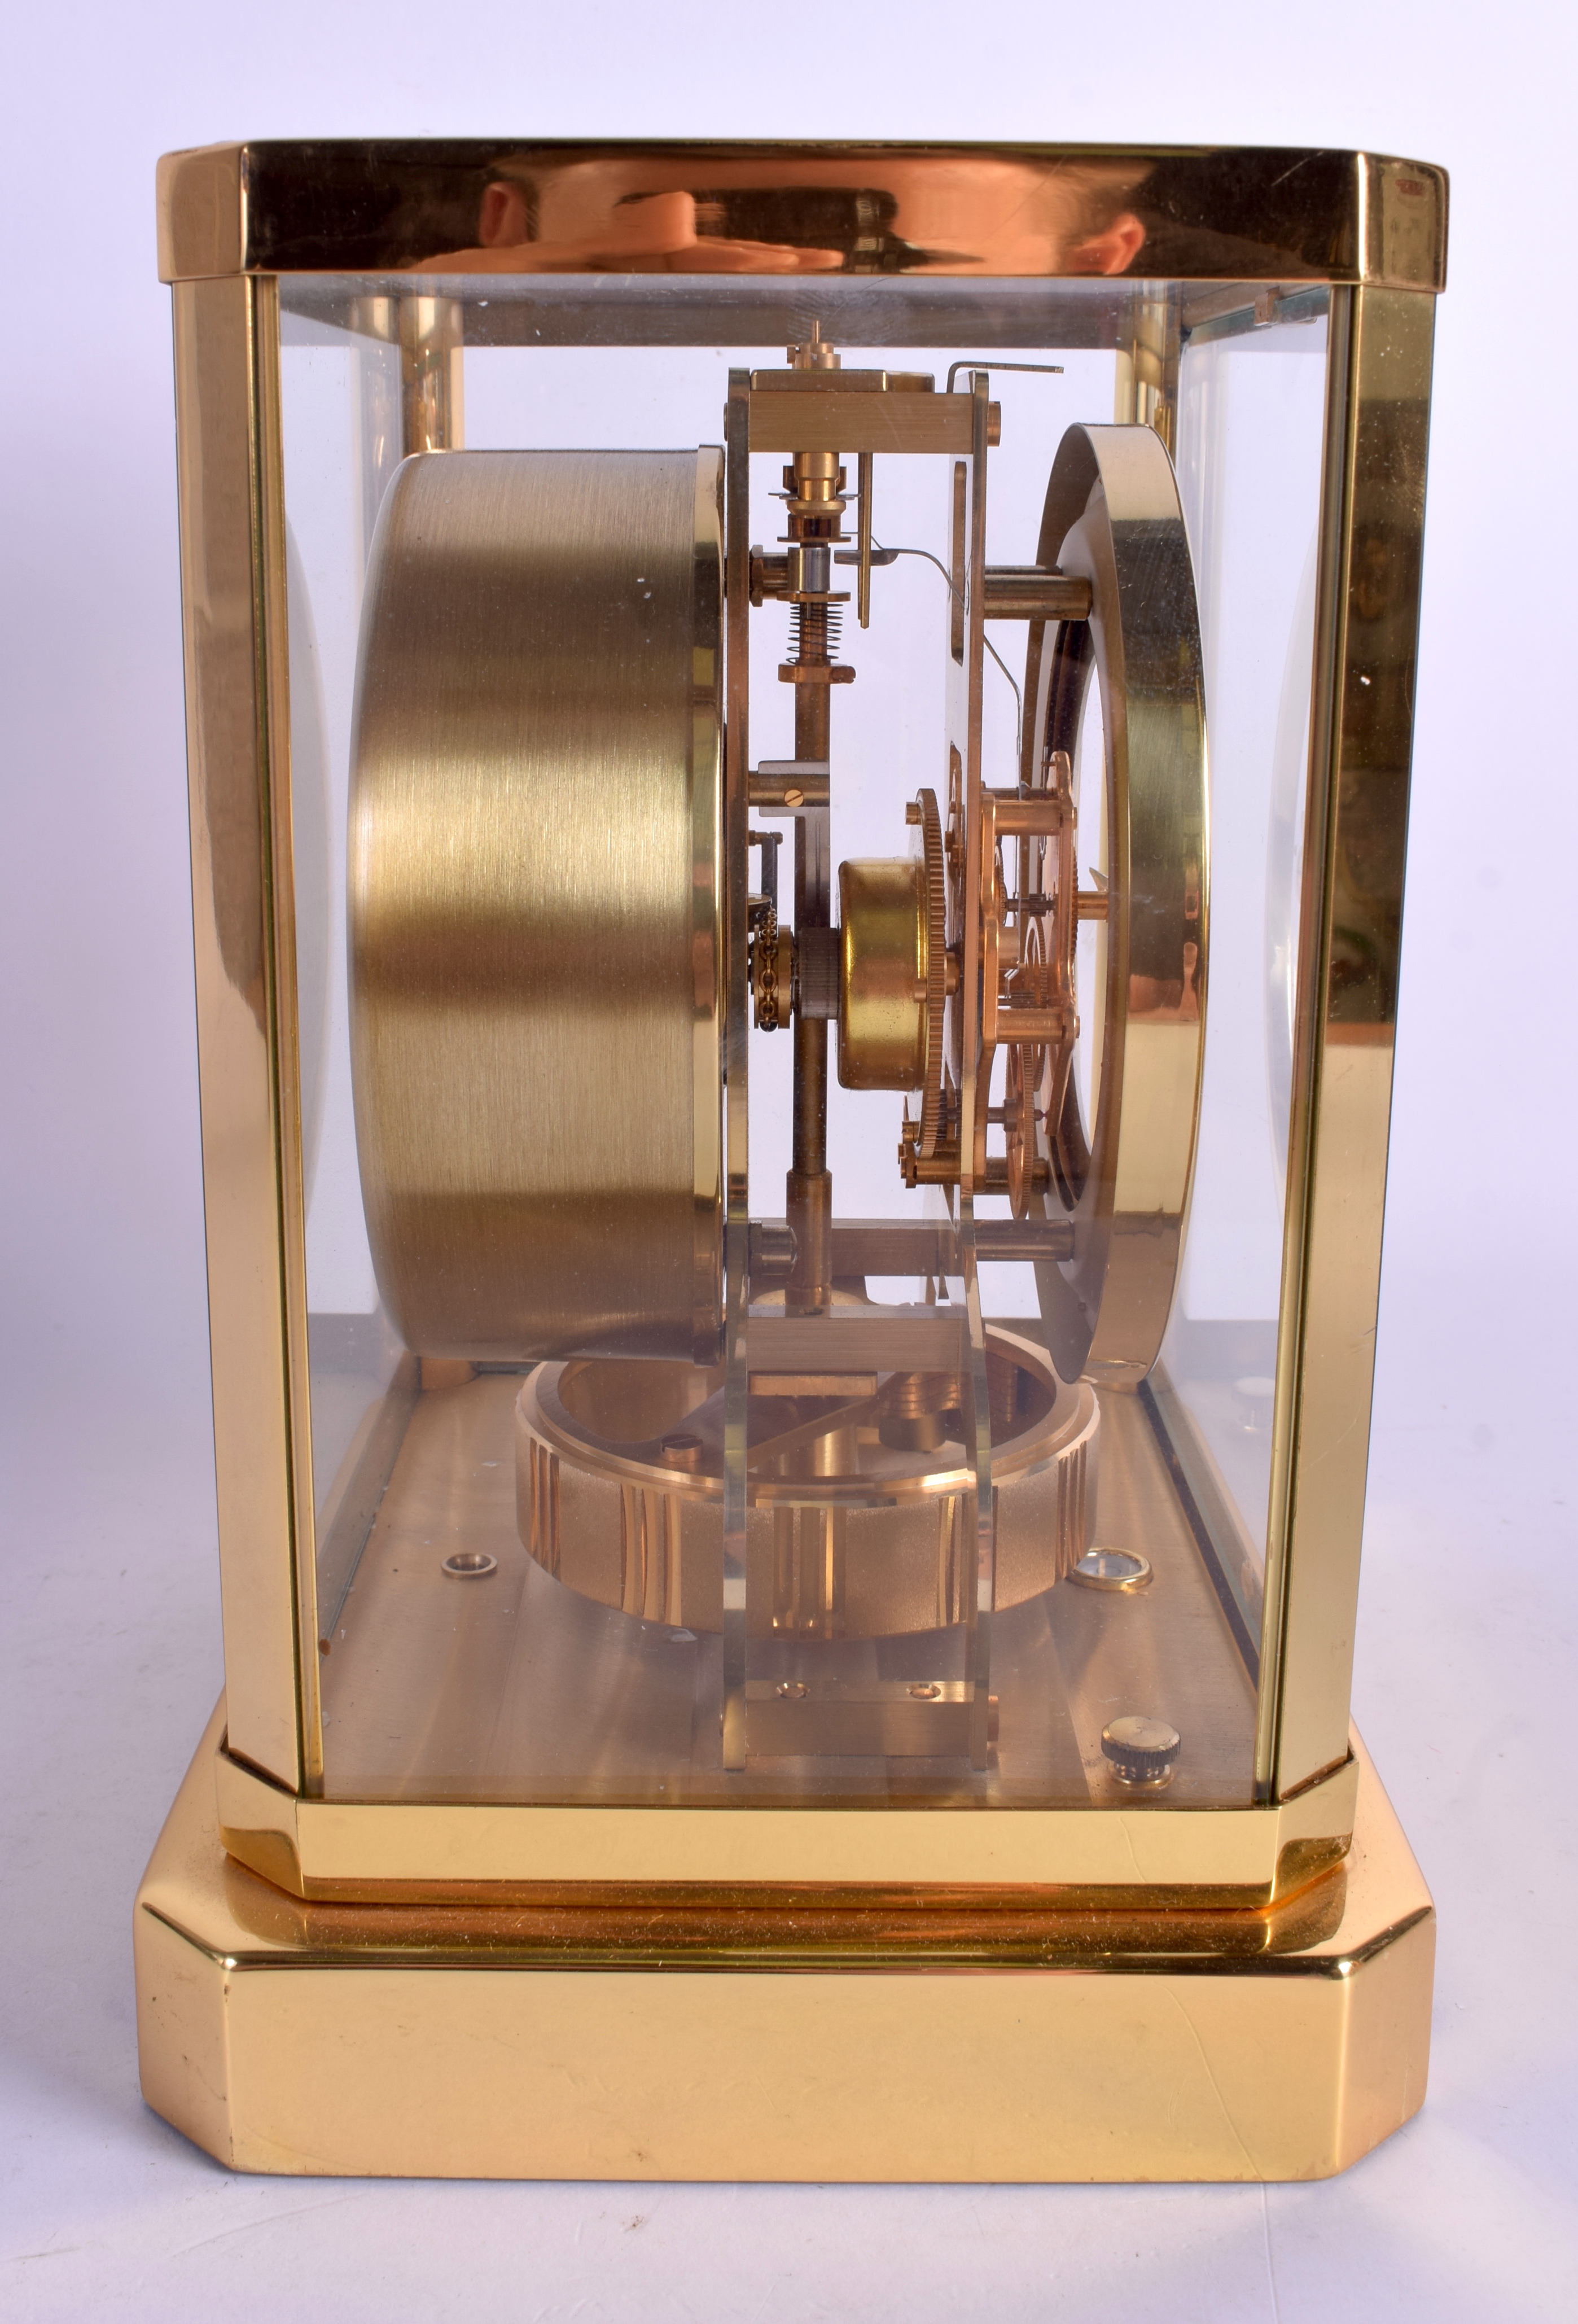 A JAEGER LE COULTER BRASS ATMOS CLOCK No. 292772. 23.5 cm x 18.5 cm. - Image 3 of 4